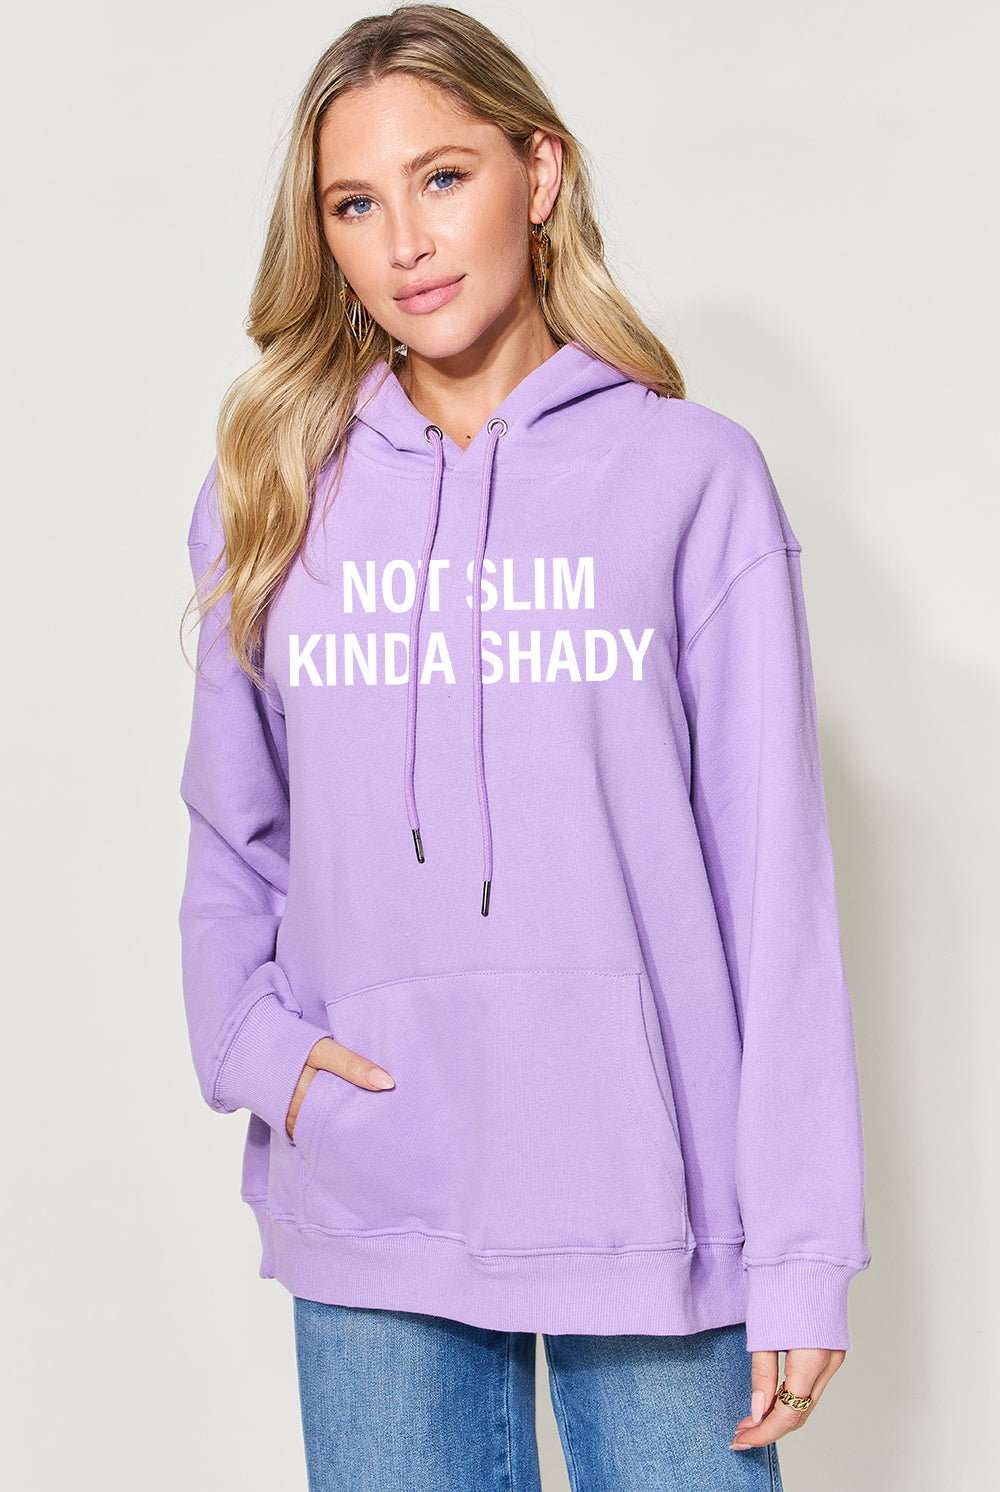 A woman wearing a black oversized hoodie with the text "NOT SLIM KINDA SHADY" printed in bold white letters across the front. The hoodie has a drawstring hood and a large kangaroo pocket. She is casually styled with light-wash denim jeans and has a natural makeup look with her blonde hair styled in loose waves. The overall vibe is relaxed and edgy.